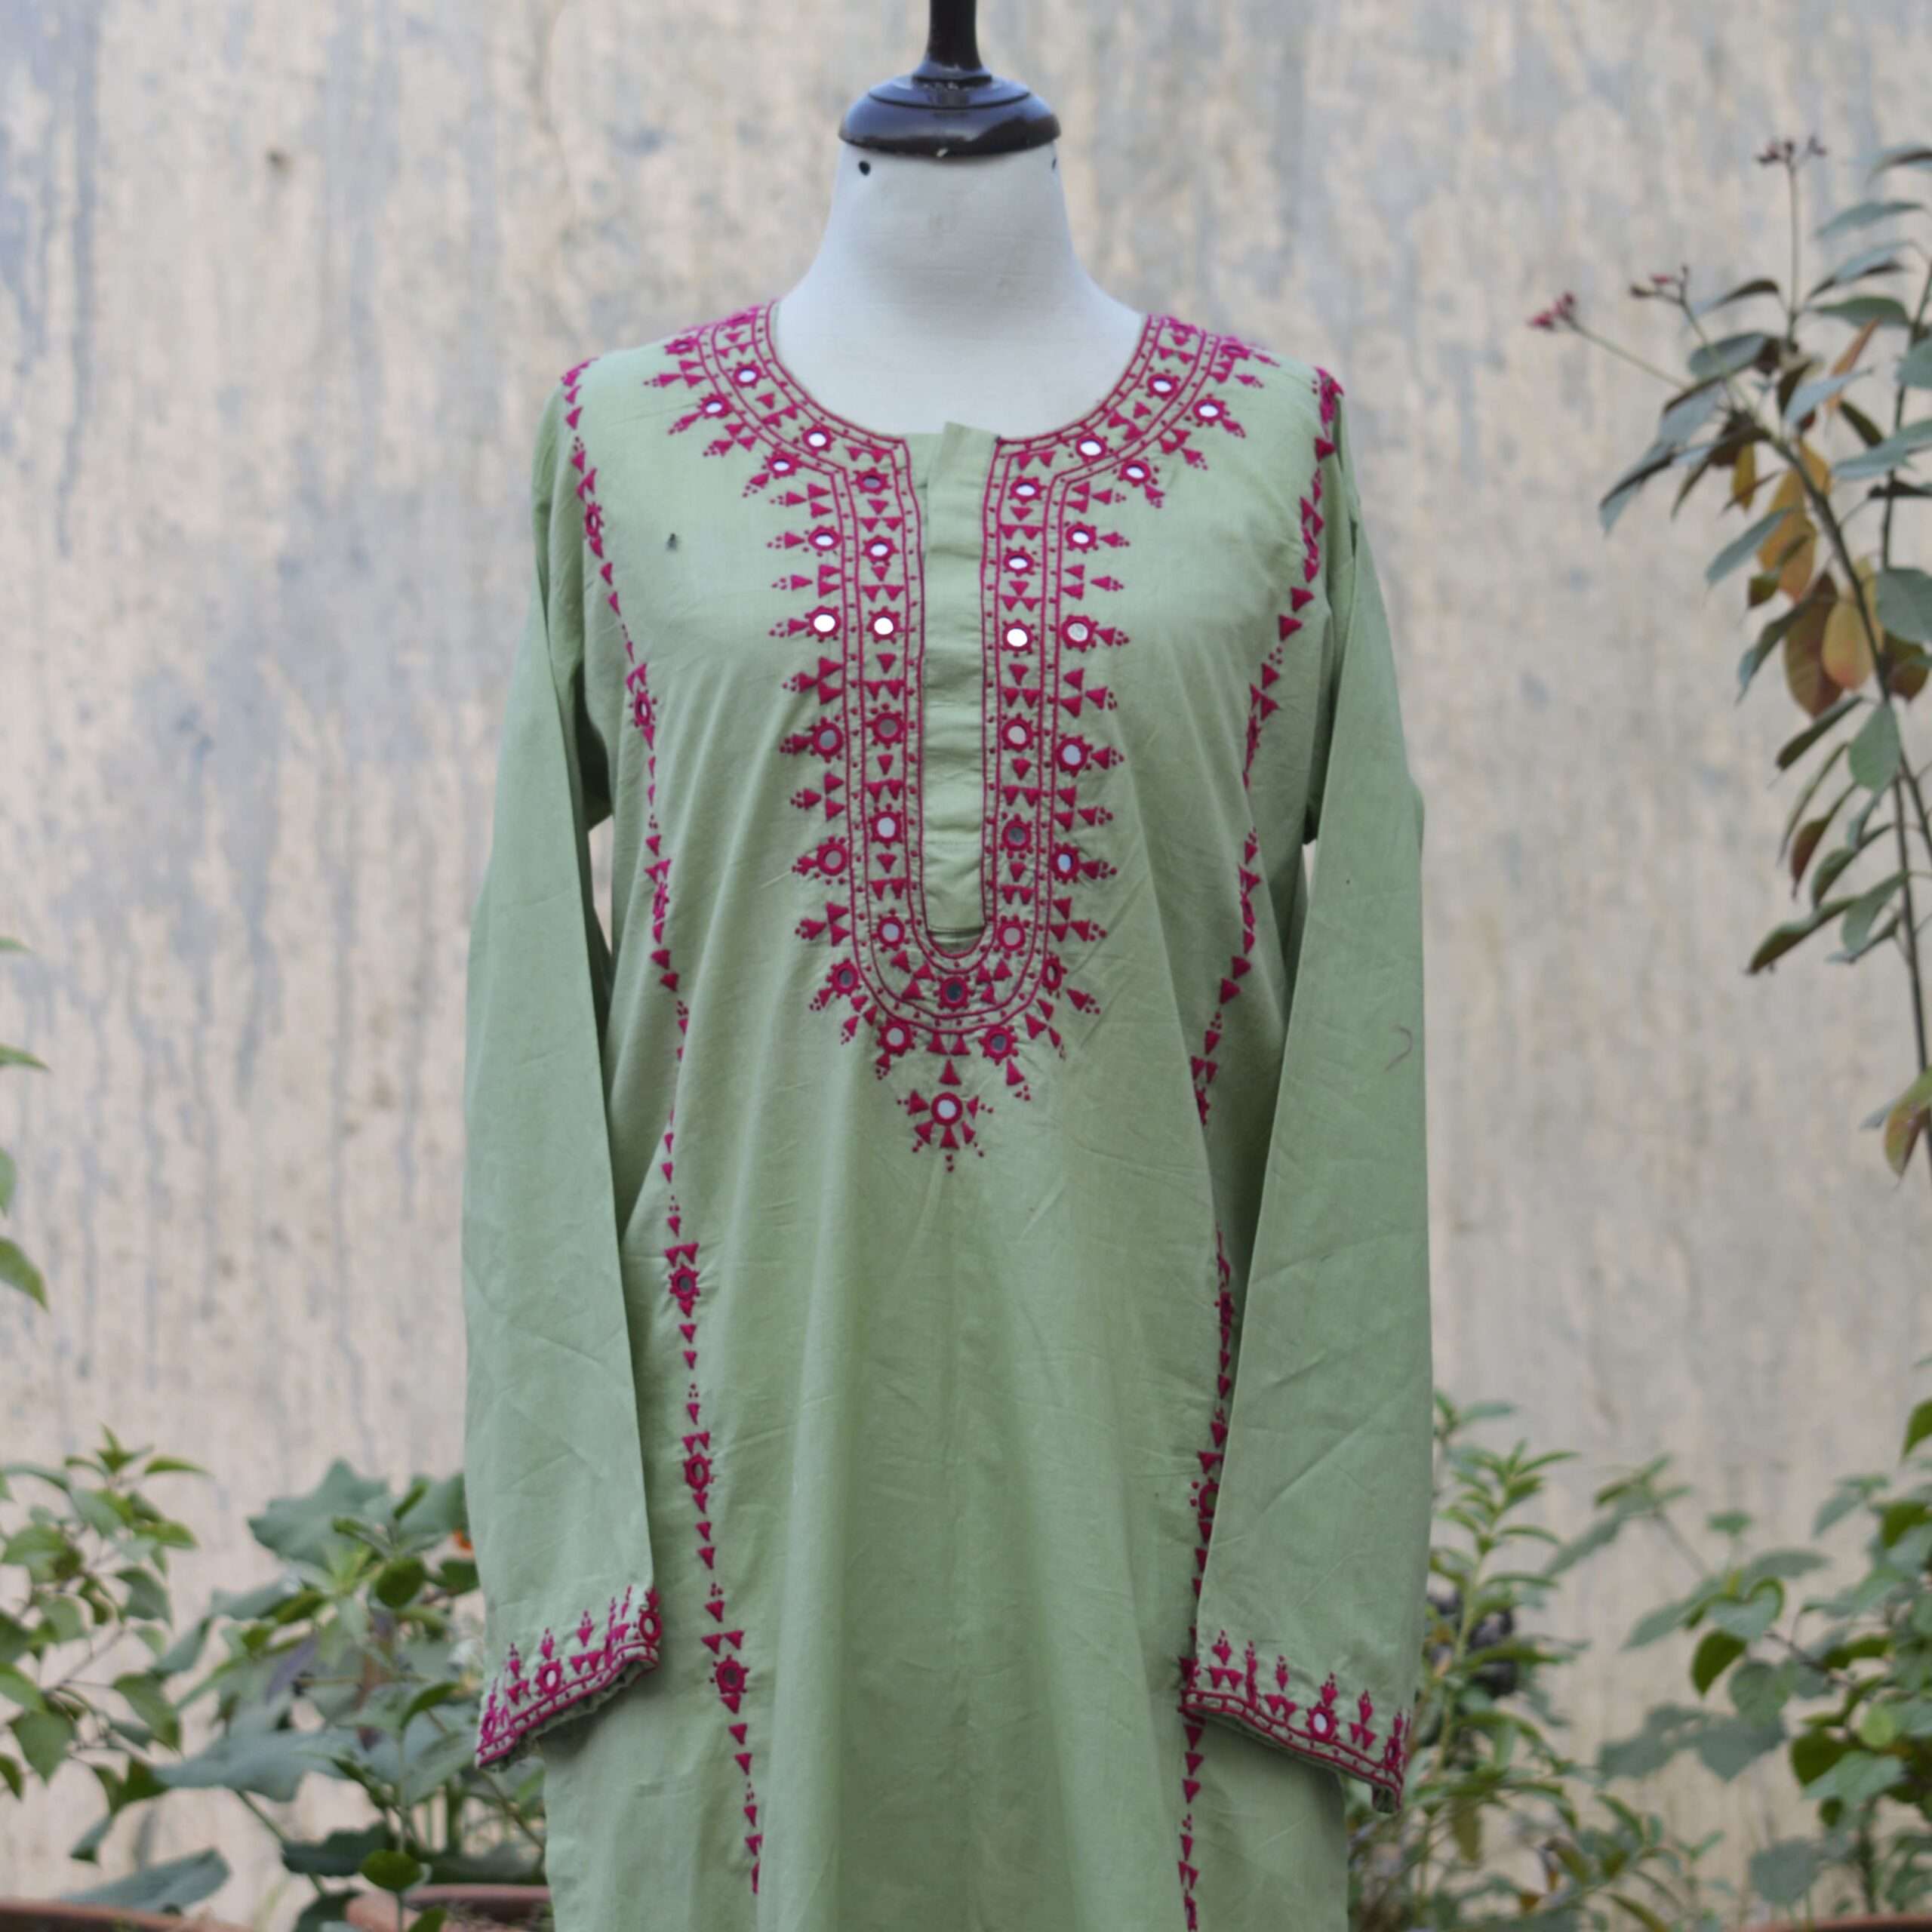 Make your Eid celebrations even more beautiful with our exquisite hand-embroidered two-piece suits! Elevate your style and embrace the joy of the occasion with elegance and grace. ✨

#EidFashion #HandEmbroidery #CelebrateInStyle #khalidkori #SartiyoonArtisans #EmbroideryArt #Sartiyoon #CulturalHeritage #ArtisanCrafts #solidscolors